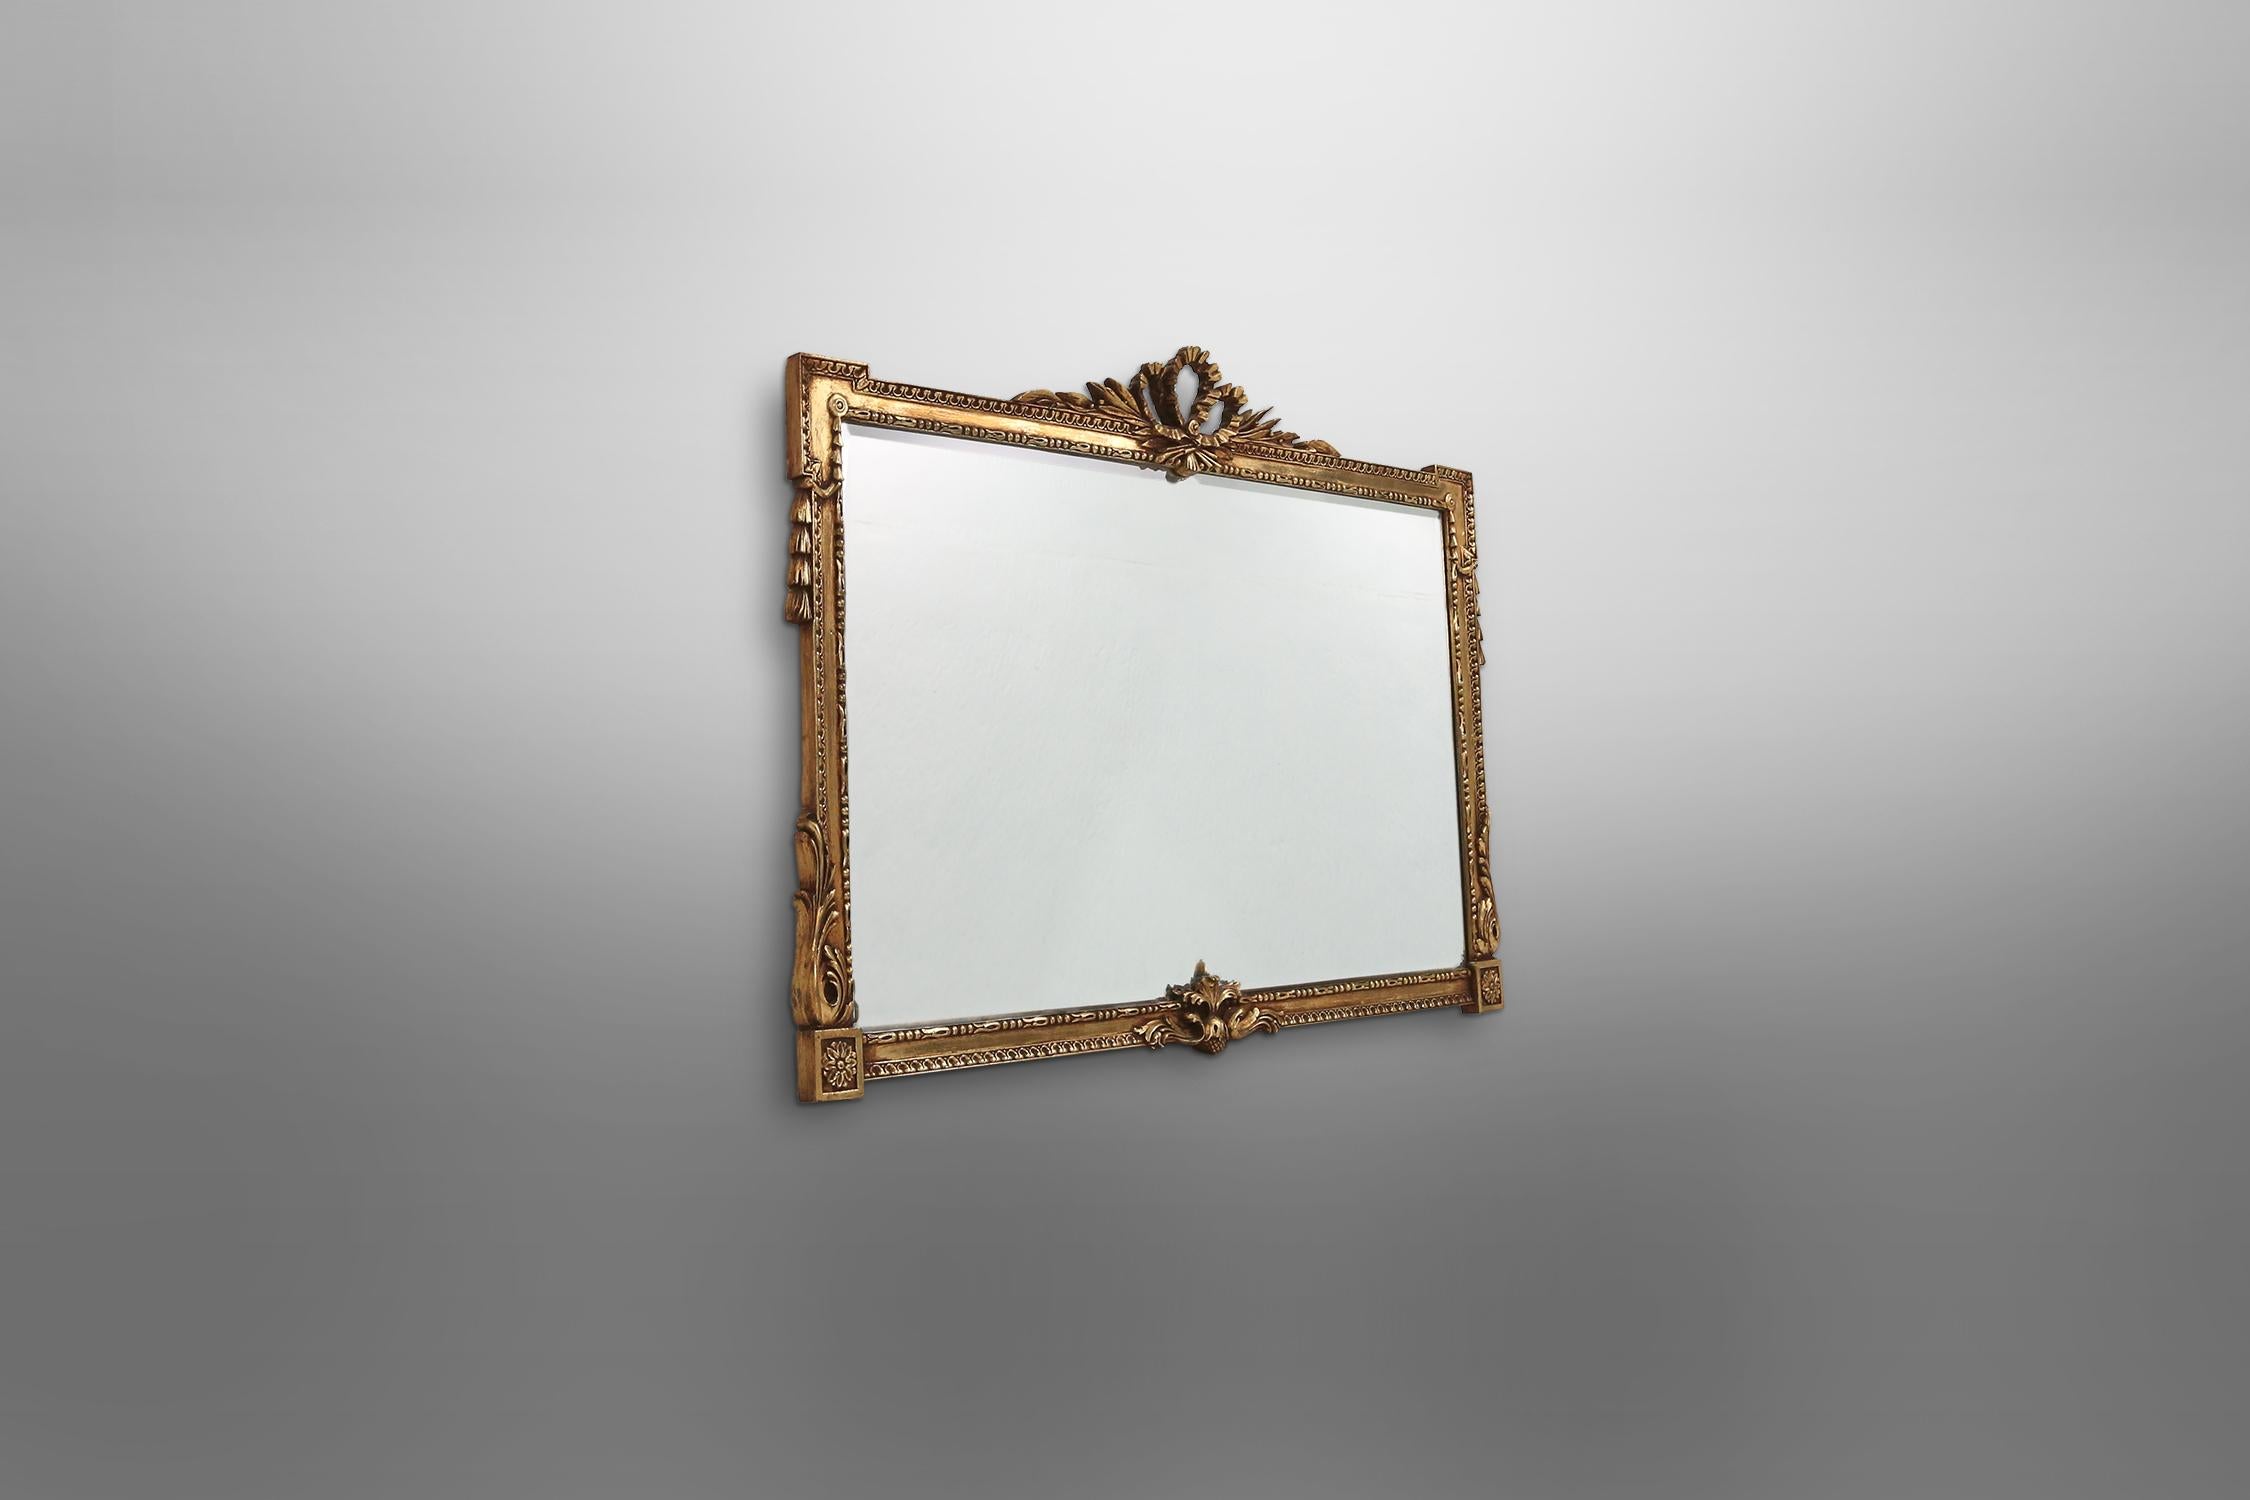 Big golden color mirror with beautiful sculpture details and with a cut glass mirror.